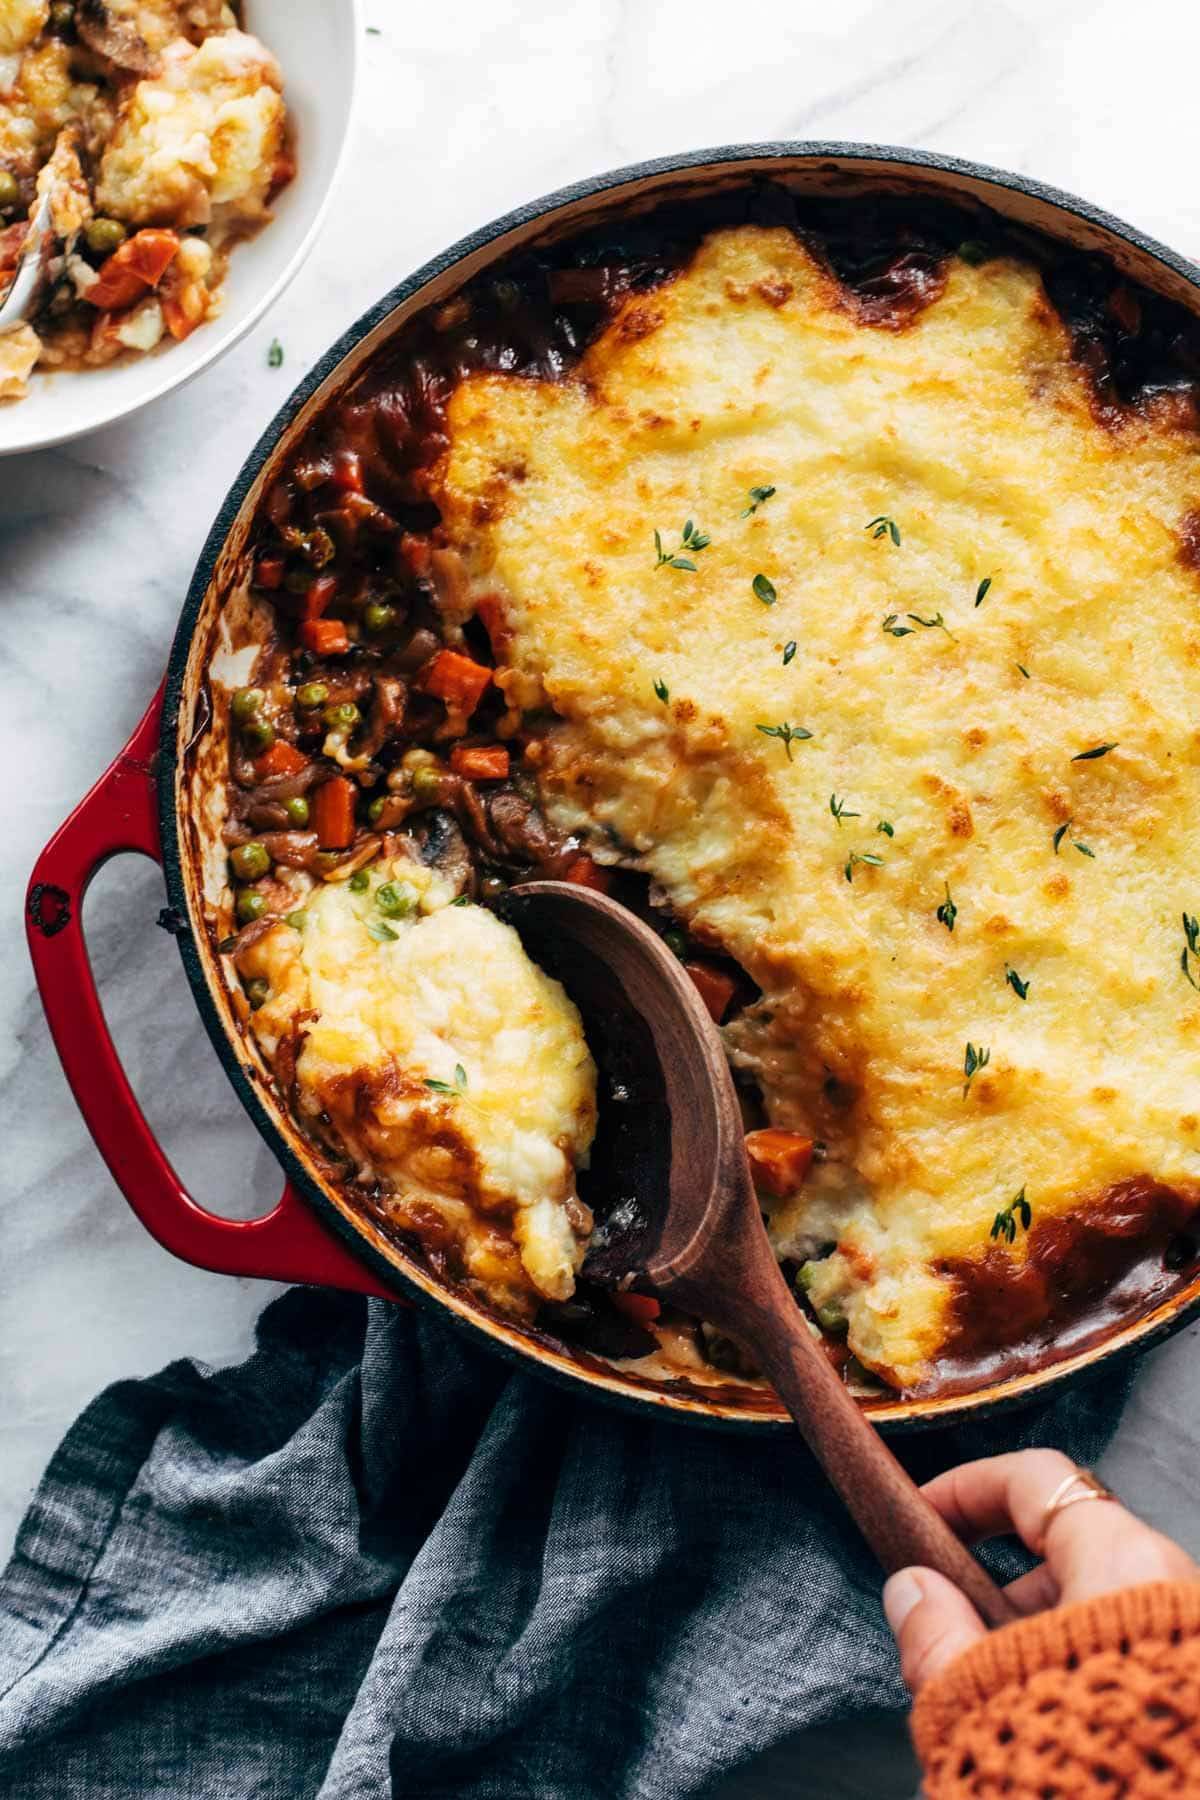 White hand scooping vegetarian shepherd's pie with a wooden spoon.